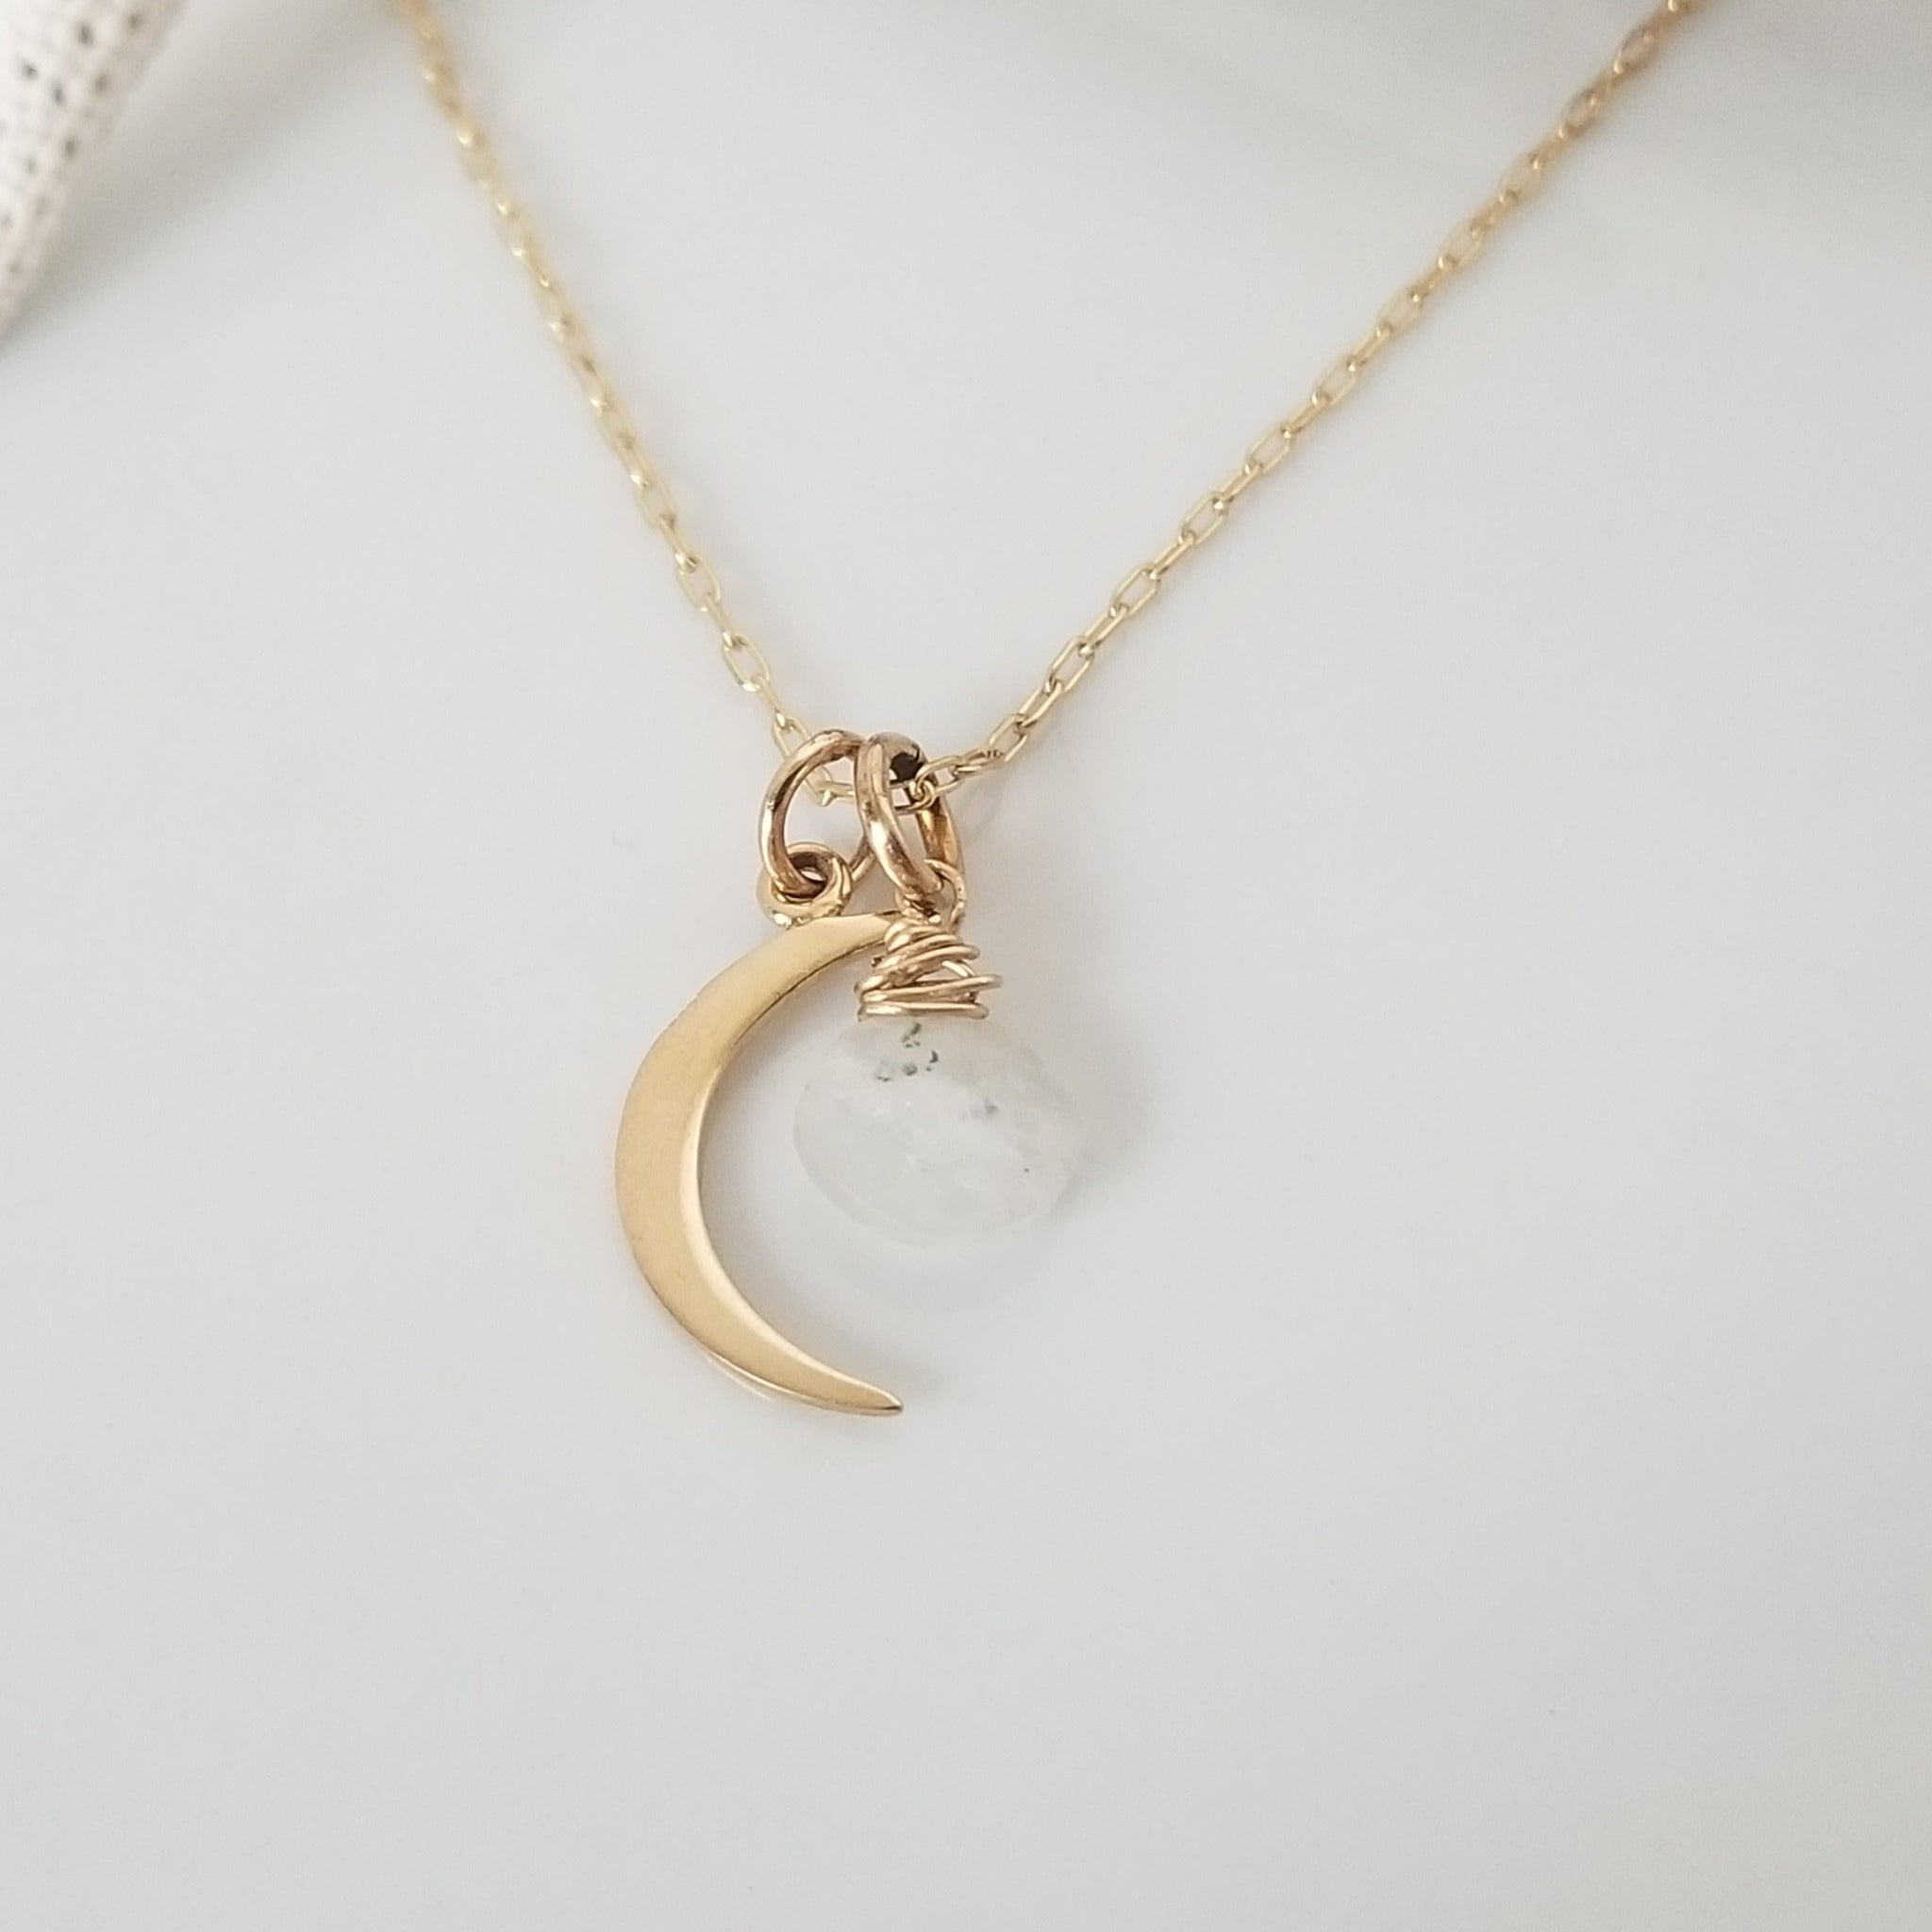 The "Lonnie" - Crescent and Moonstone Necklace - Sterling or Gold